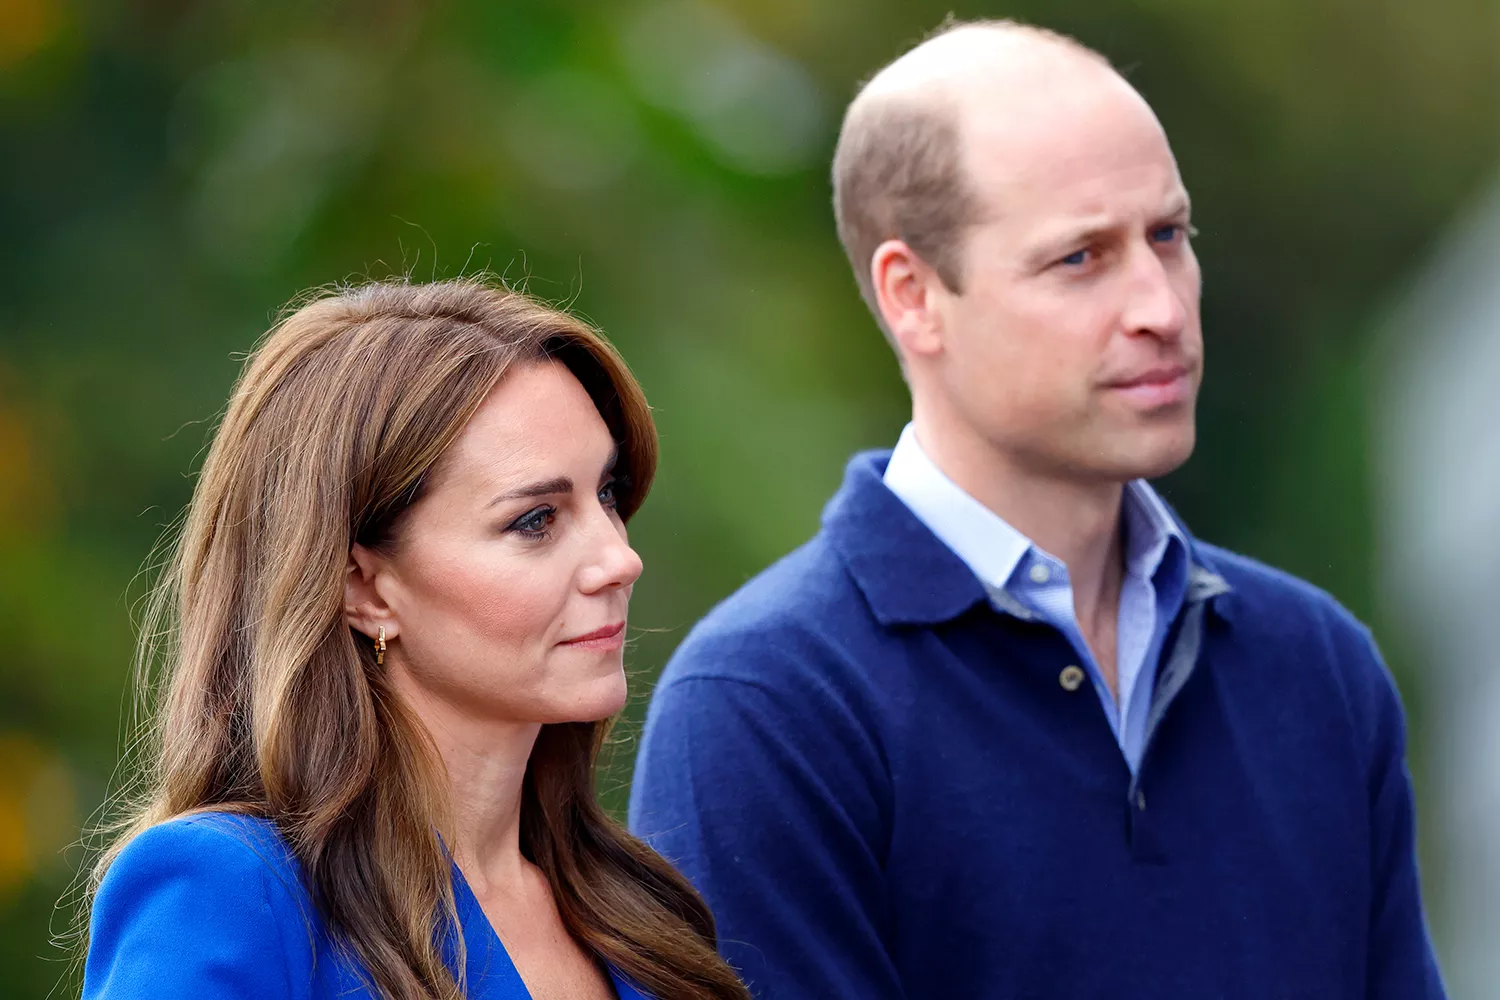 Prince William vows to care for Kate Middleton during her cancer treatment, as they receive well-wishes for her and King Charles.